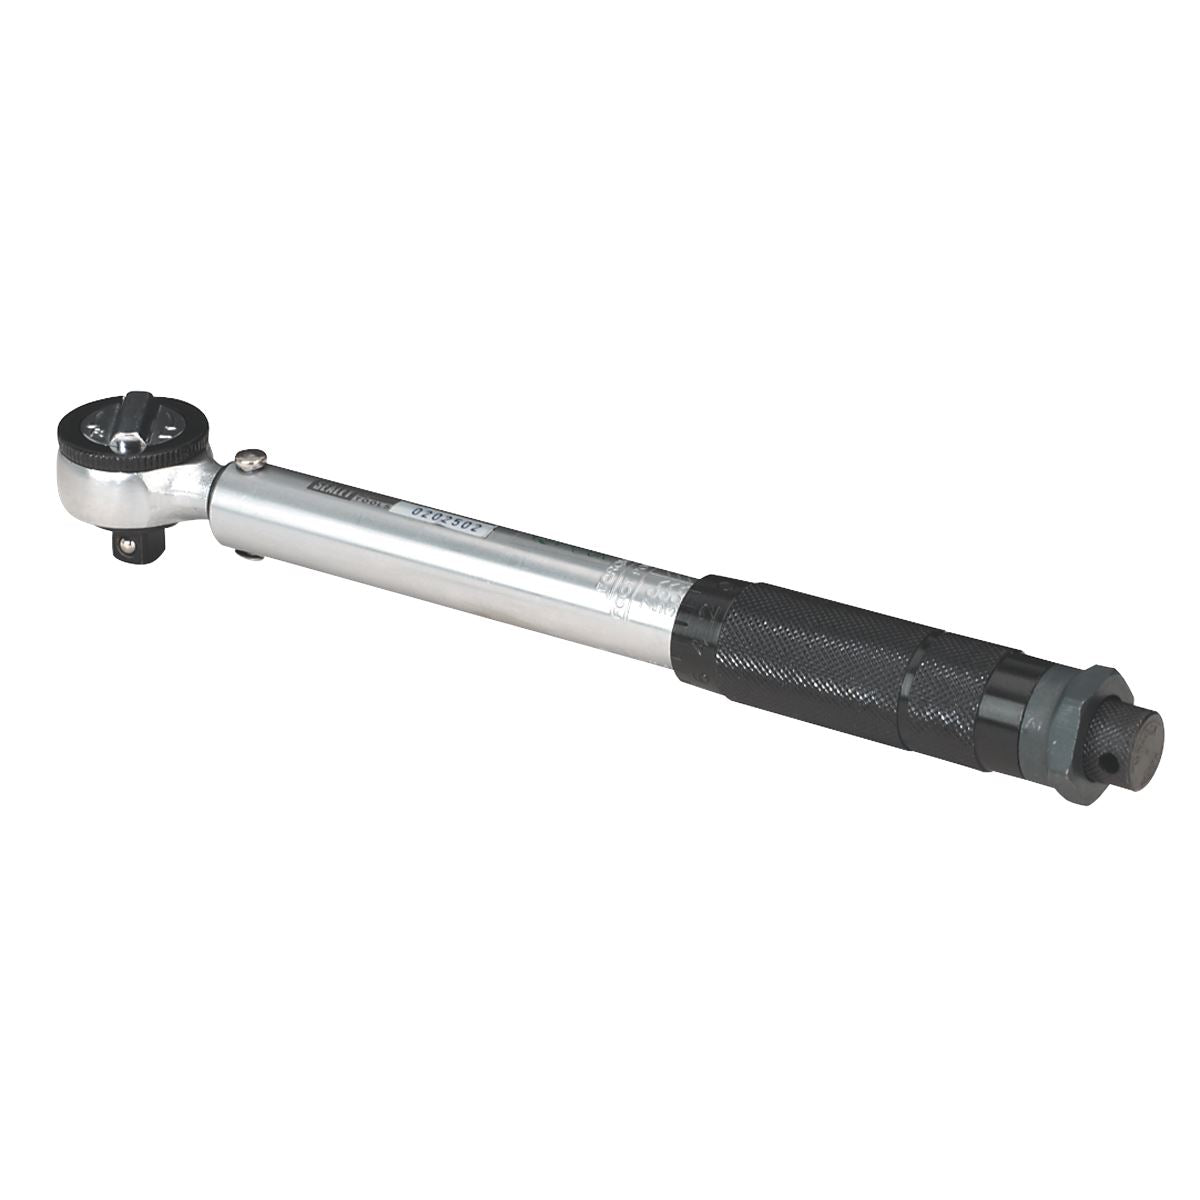 Sealey Micrometer Torque Wrench 3/8"Sq Drive Calibrated Premier Flip Reverse